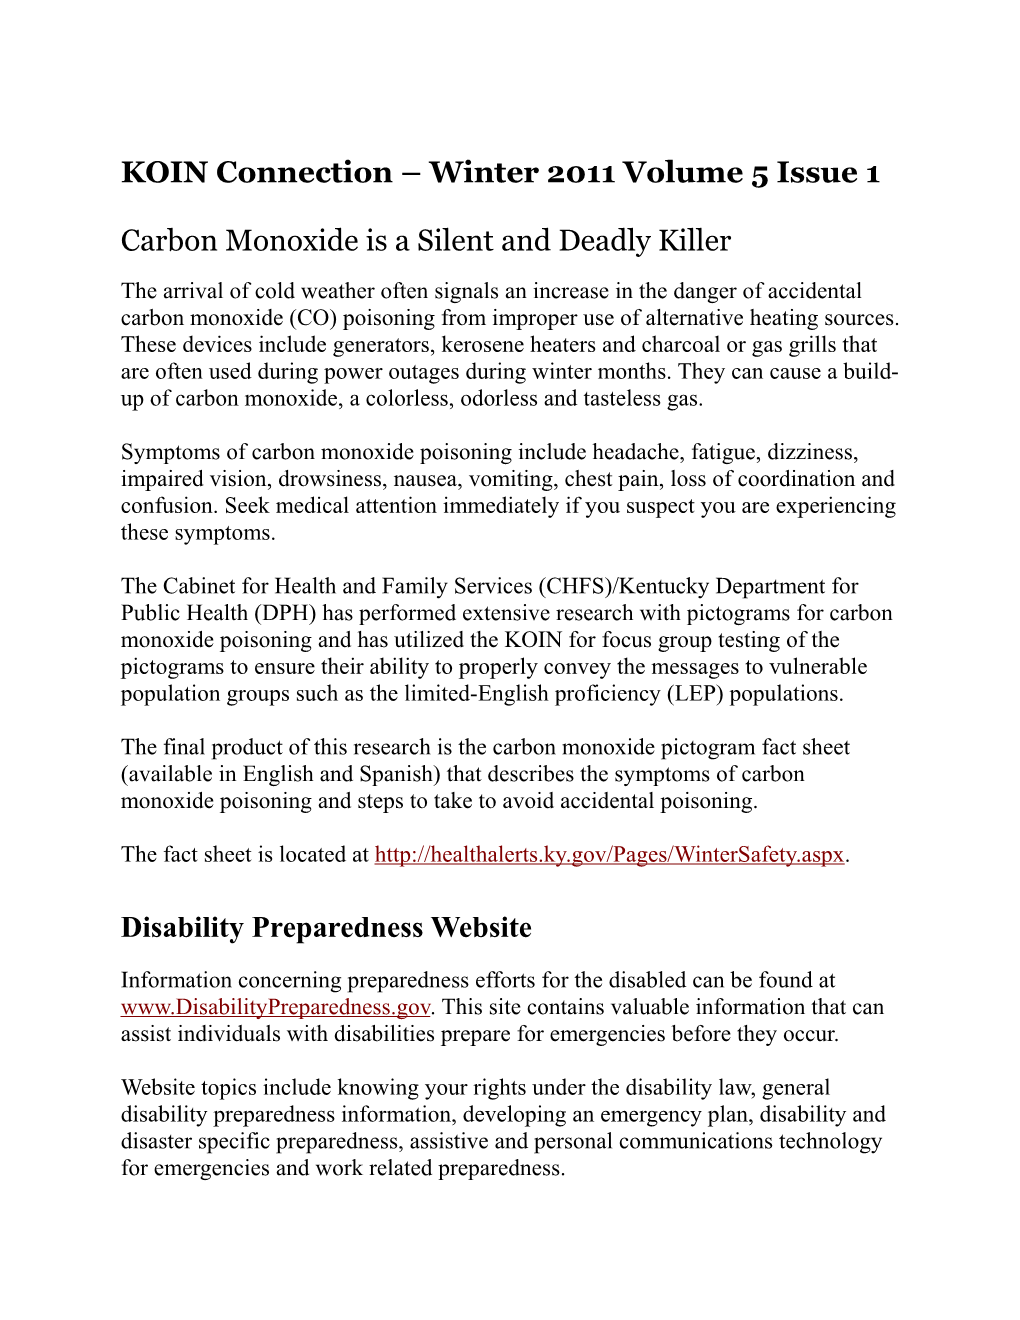 KOIN Connection Winter 2011 Volume 5 Issue 1